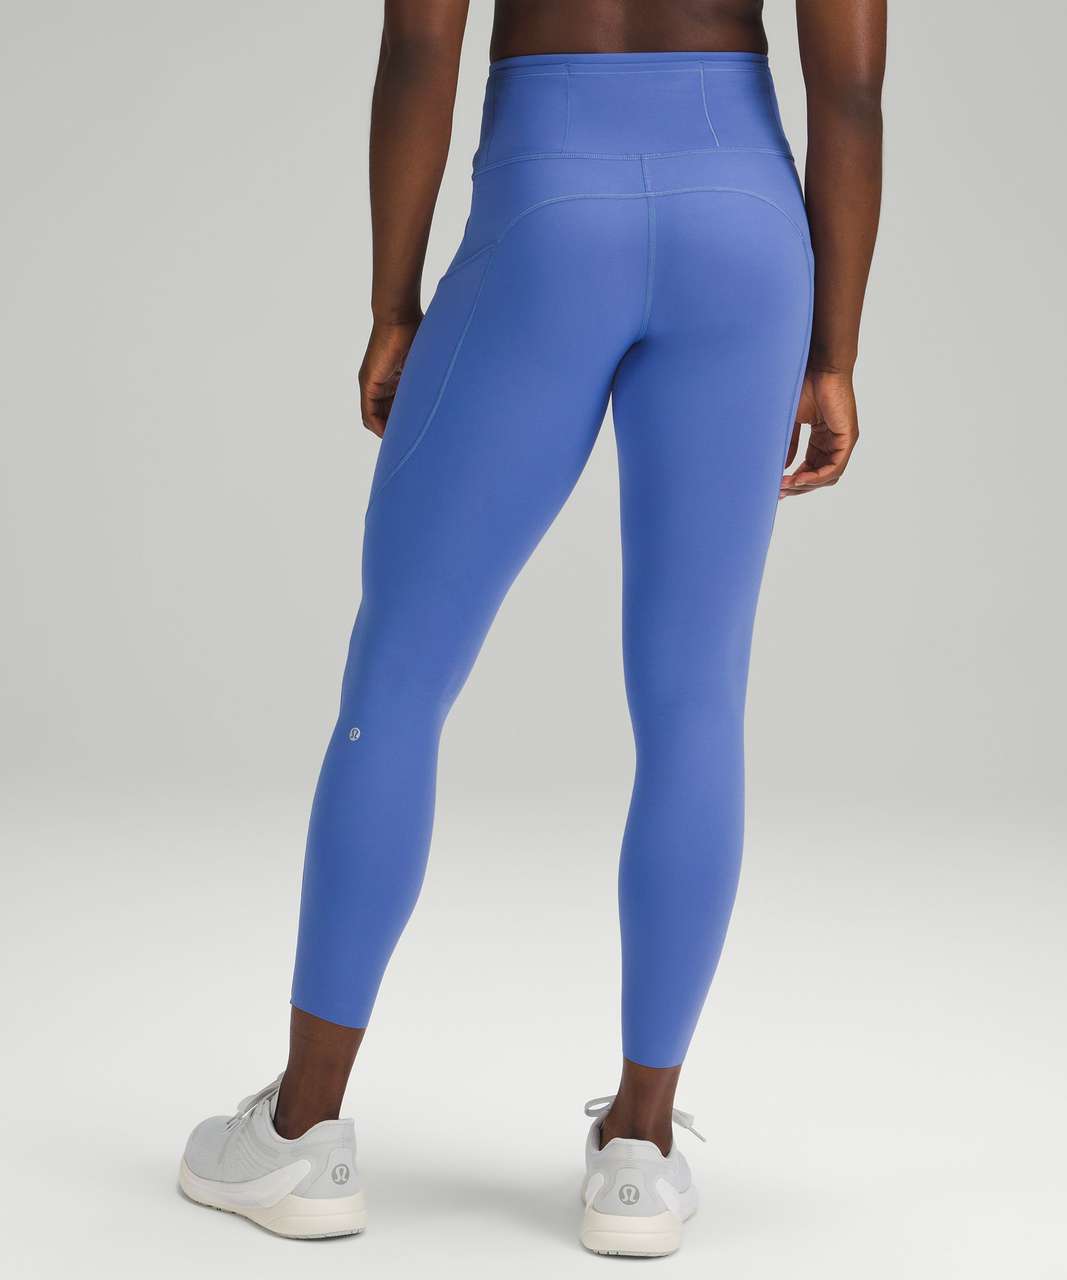 Fast and Free High-Rise Tight 25